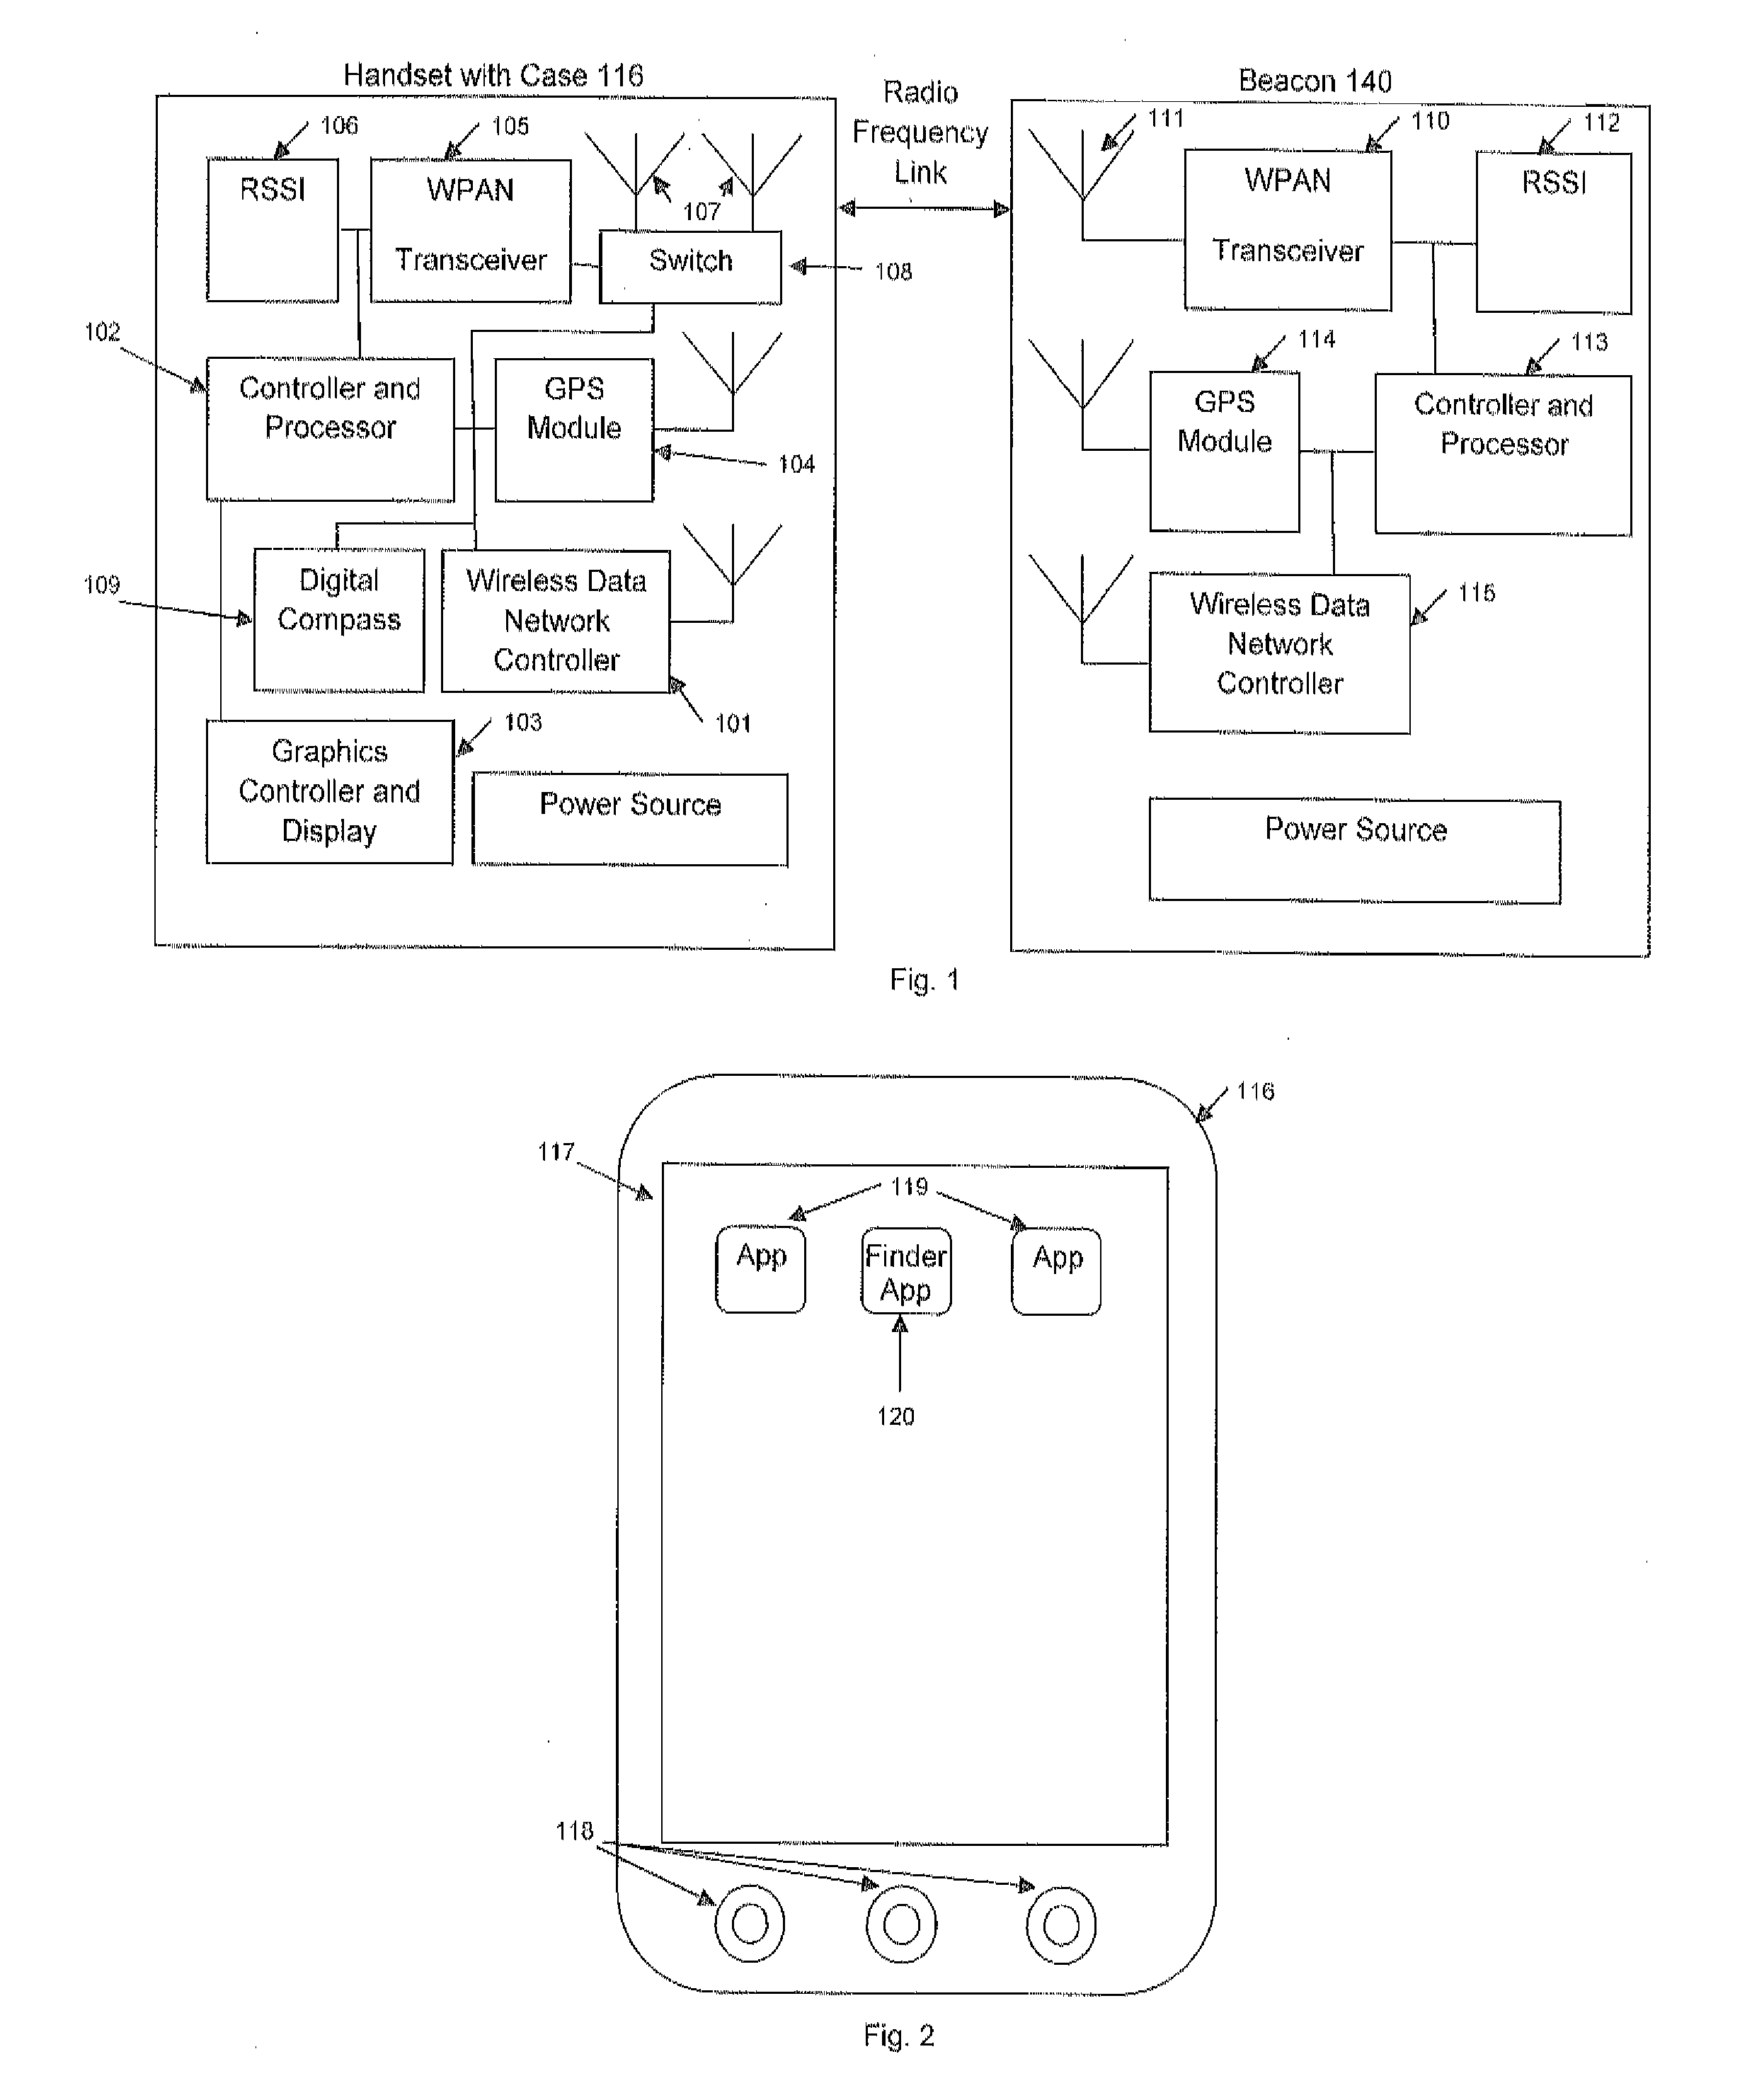 Apparatus and Method for Using a Wireless Mobile Handset Application to Locate Beacons